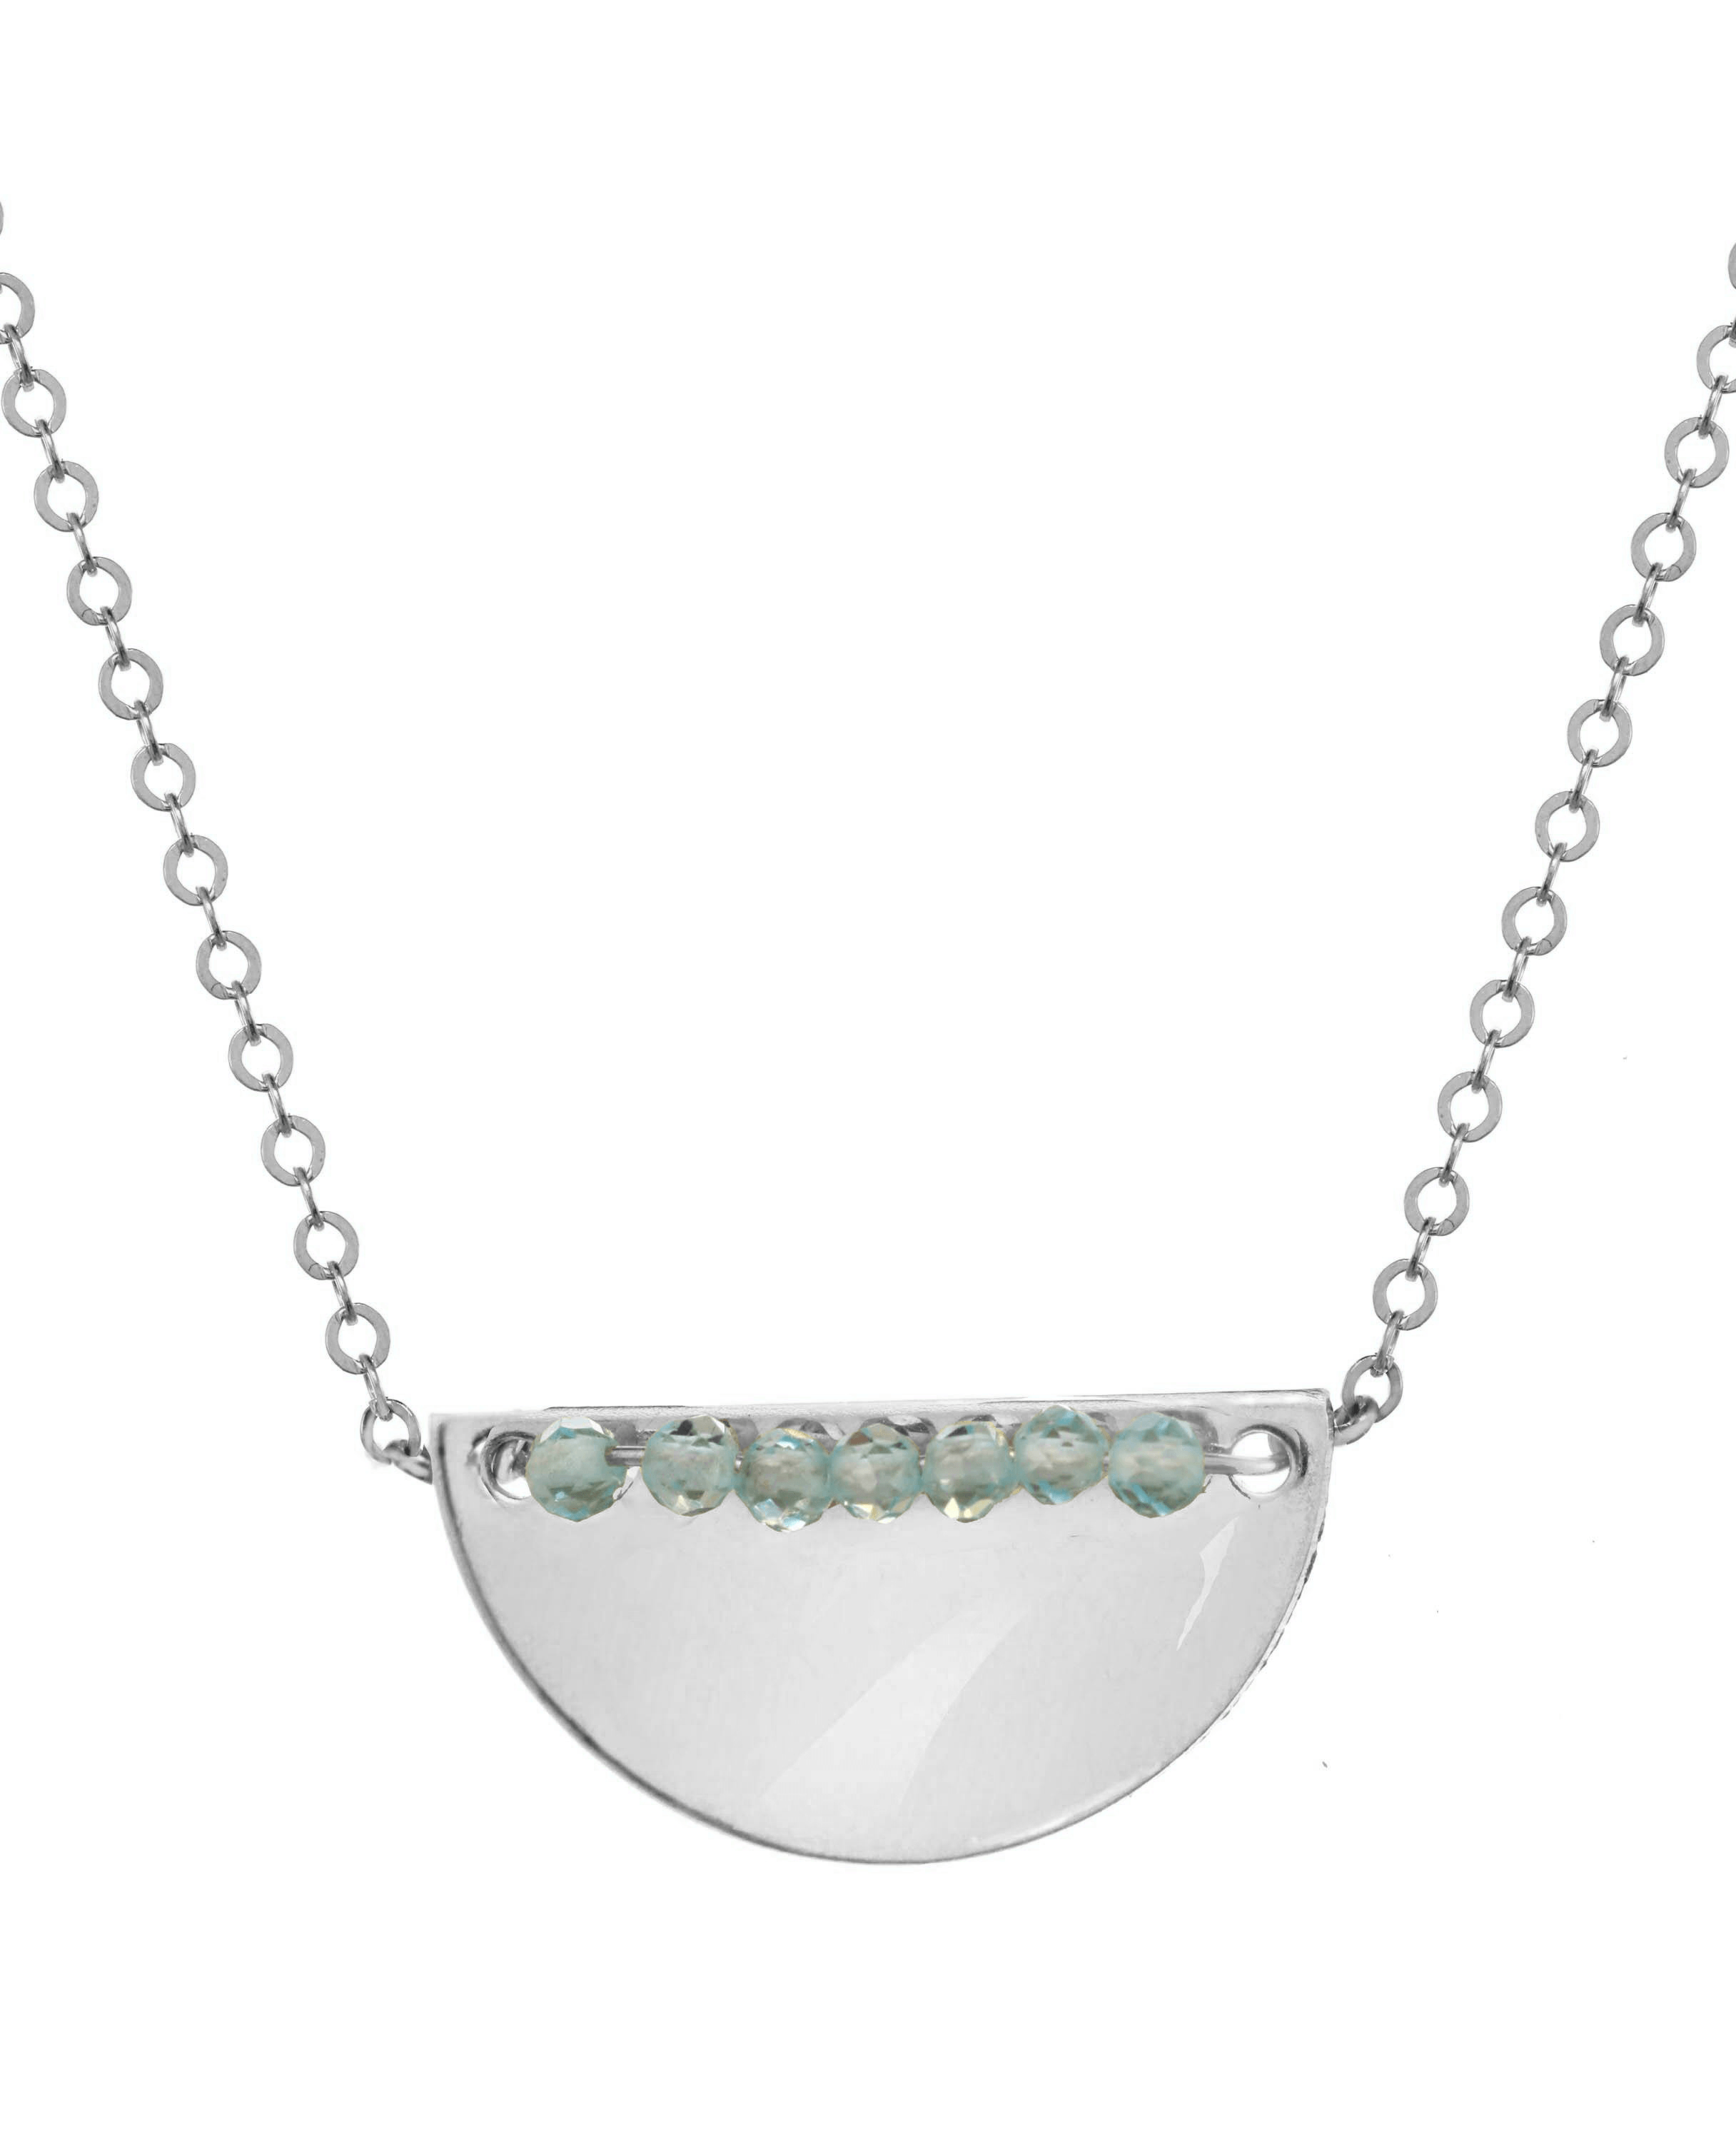 Medina Necklace by KOZAKH. A 16 to 18 inch adjustable length necklace, crafted in Sterling Silver, featuring 2mm faceted gems lined up on a half moon shaped flat metal.